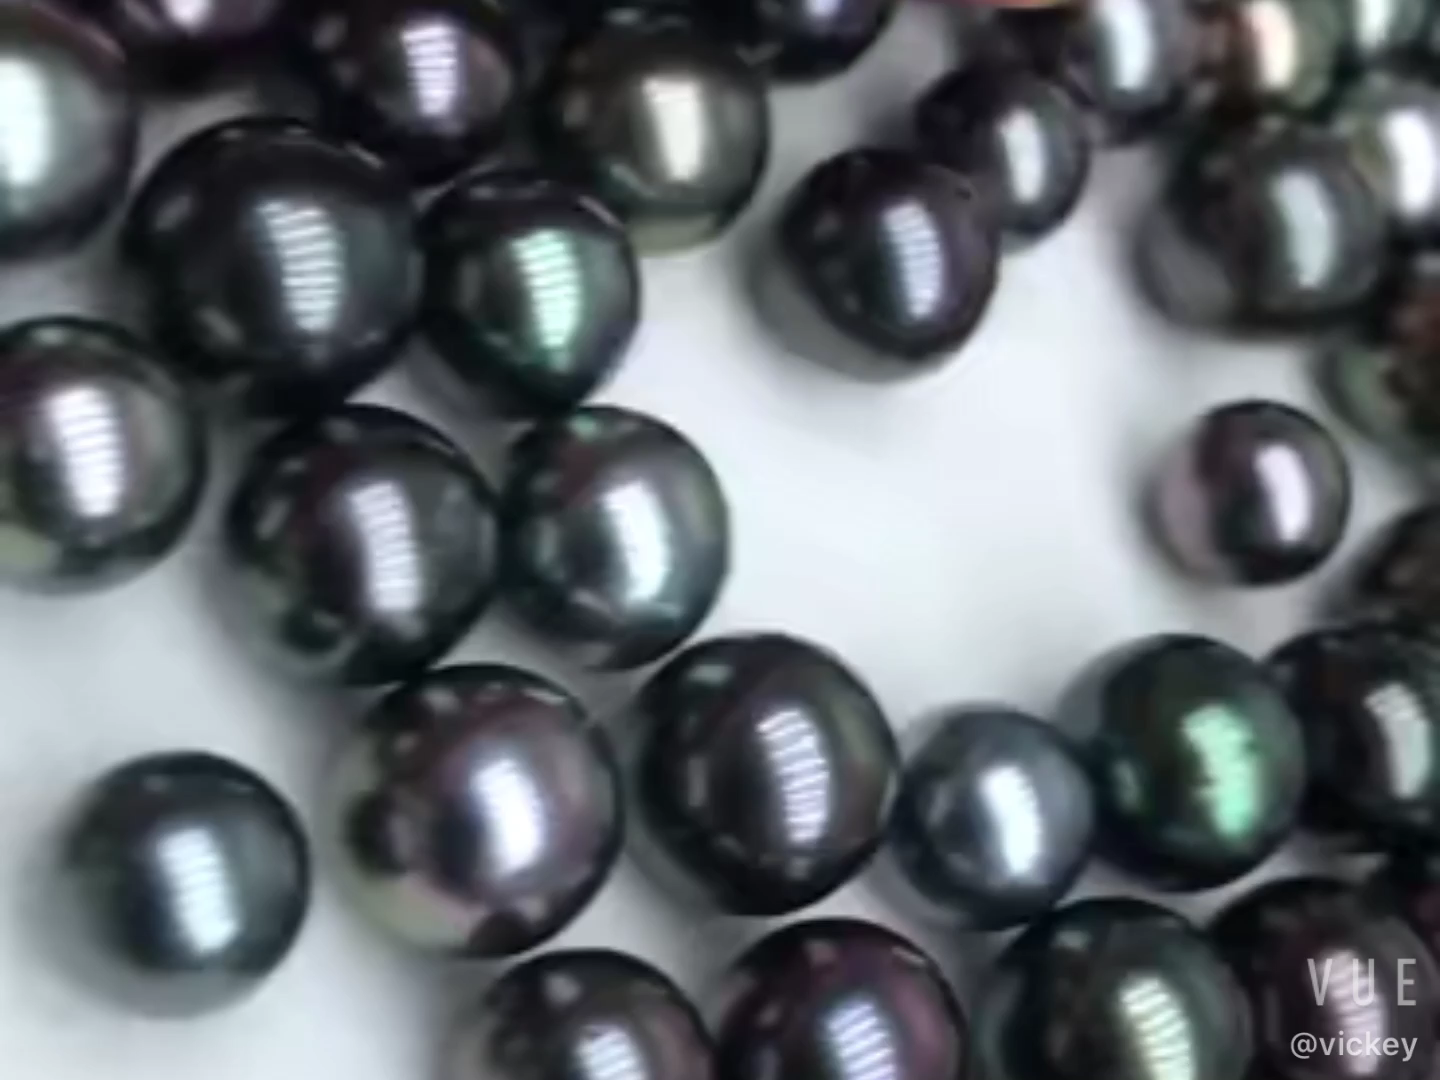 8-11 mm Tahitian Pearls Wholesale AA near round nature loose Tahitian pearl with half,OR no hole,black color